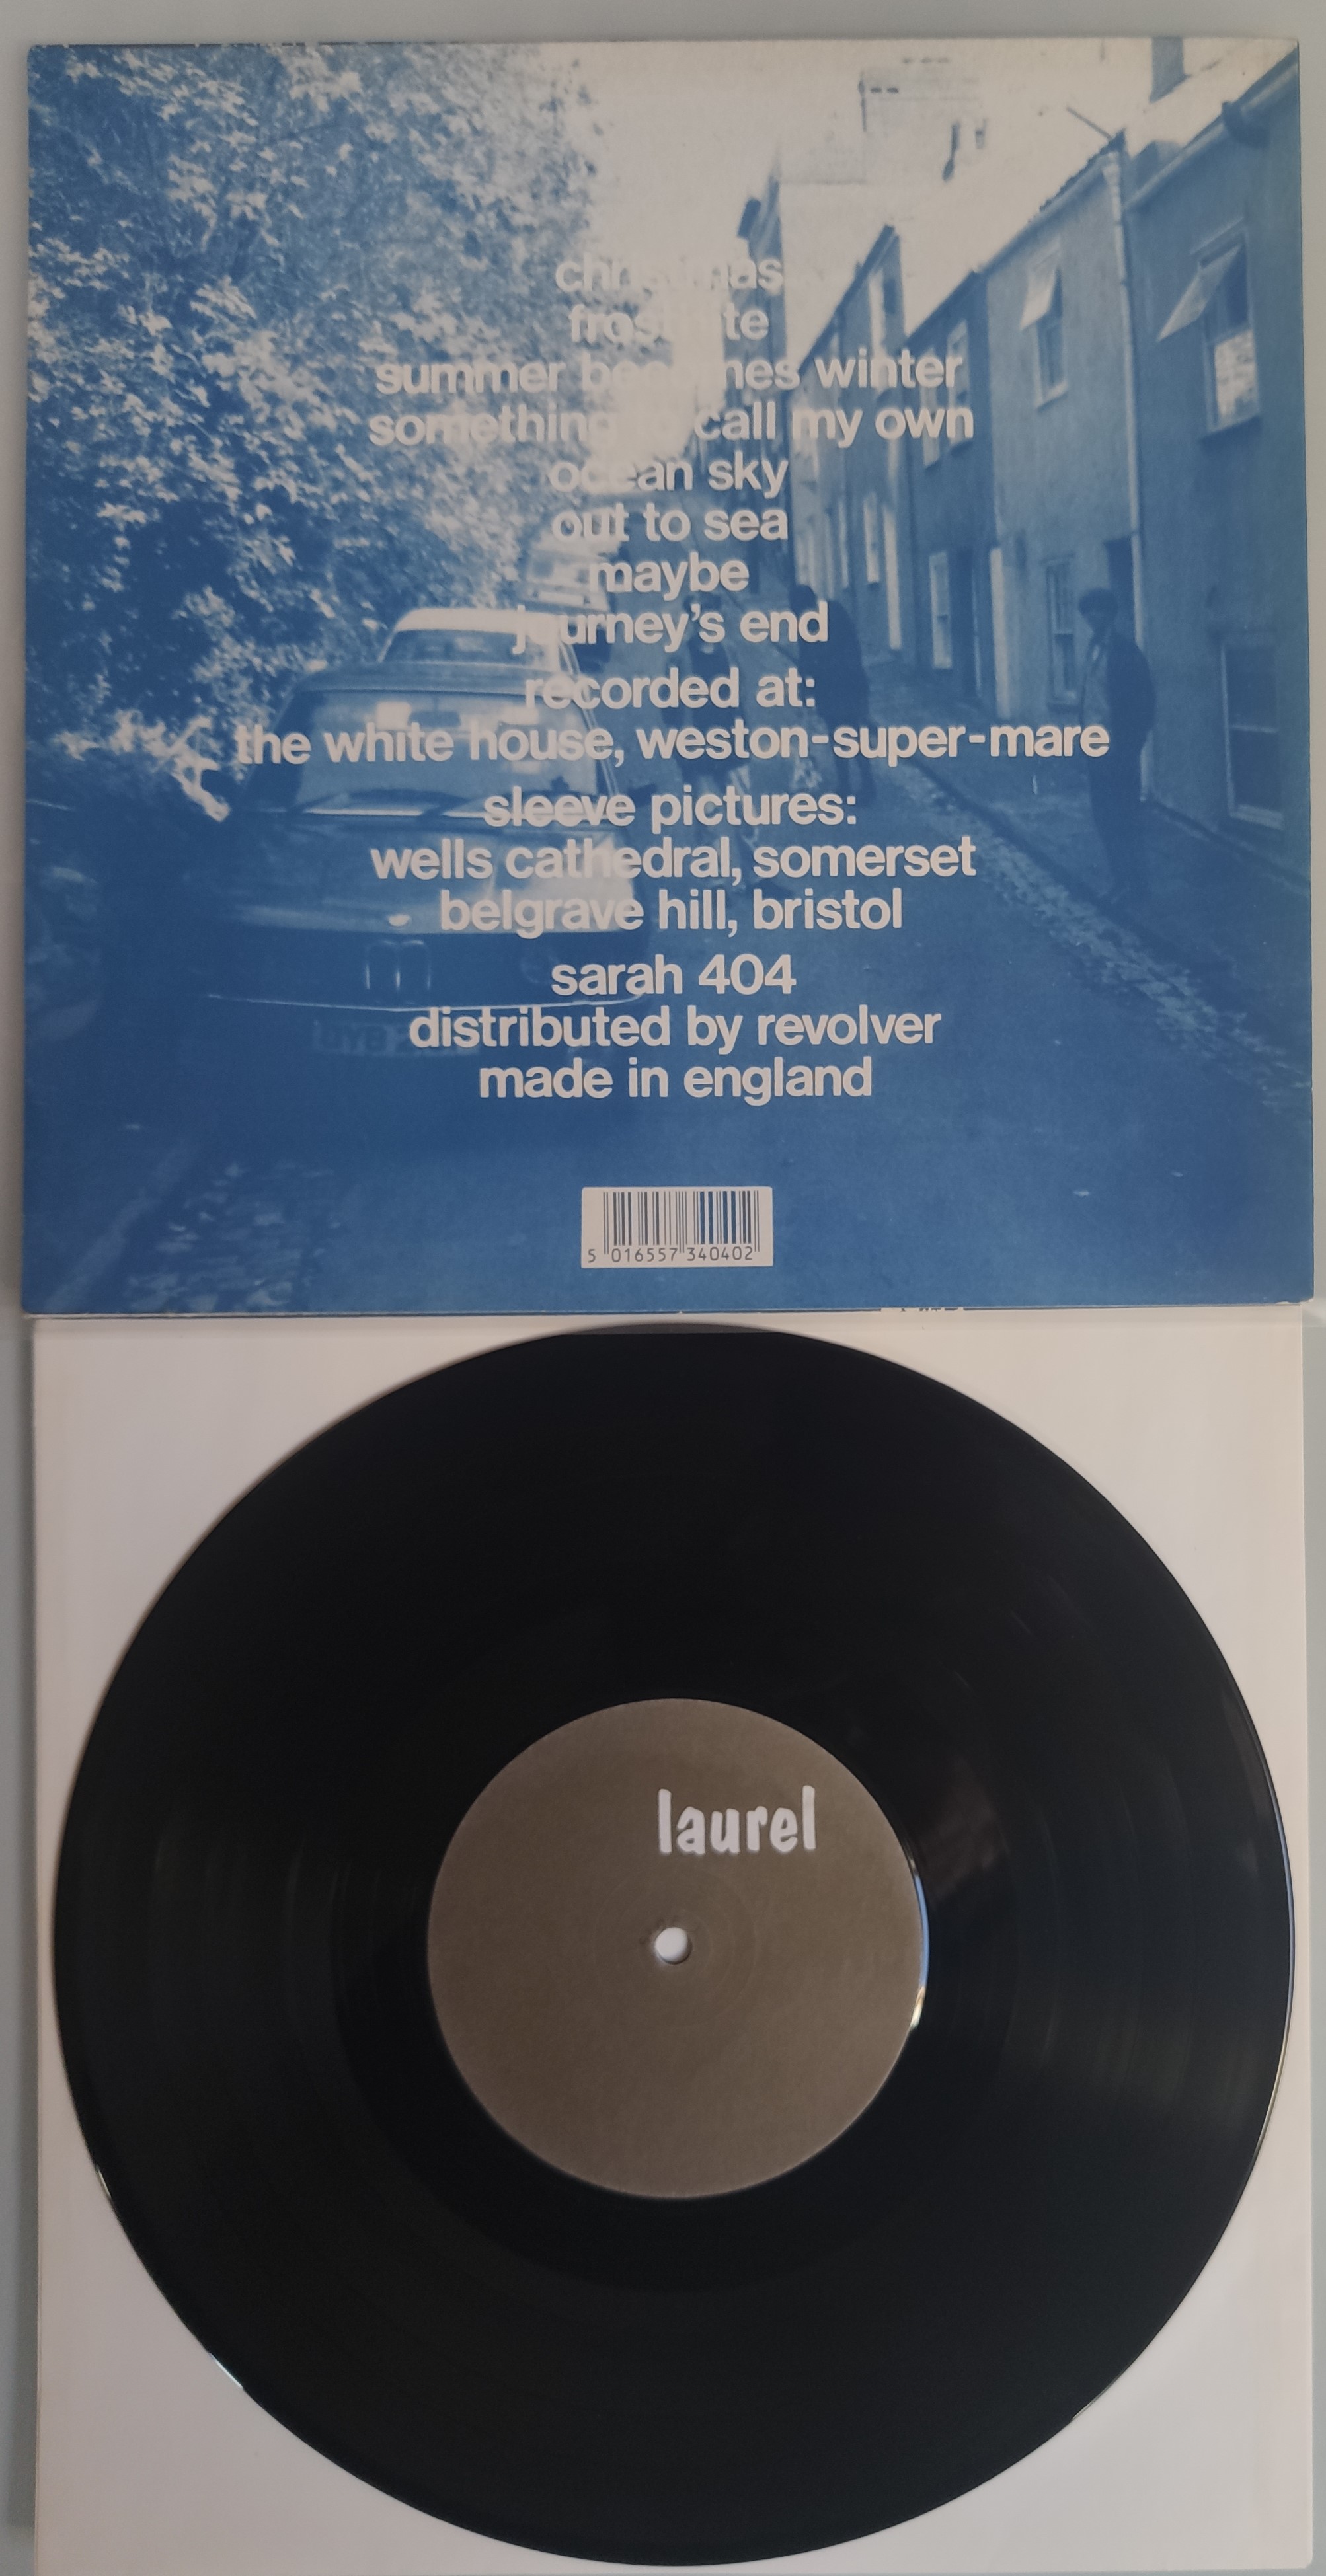 Brighter – Laurel 10” Vinyl Record – UK 1991 First Pressing A1 / B1. EX Condition. - Image 2 of 2